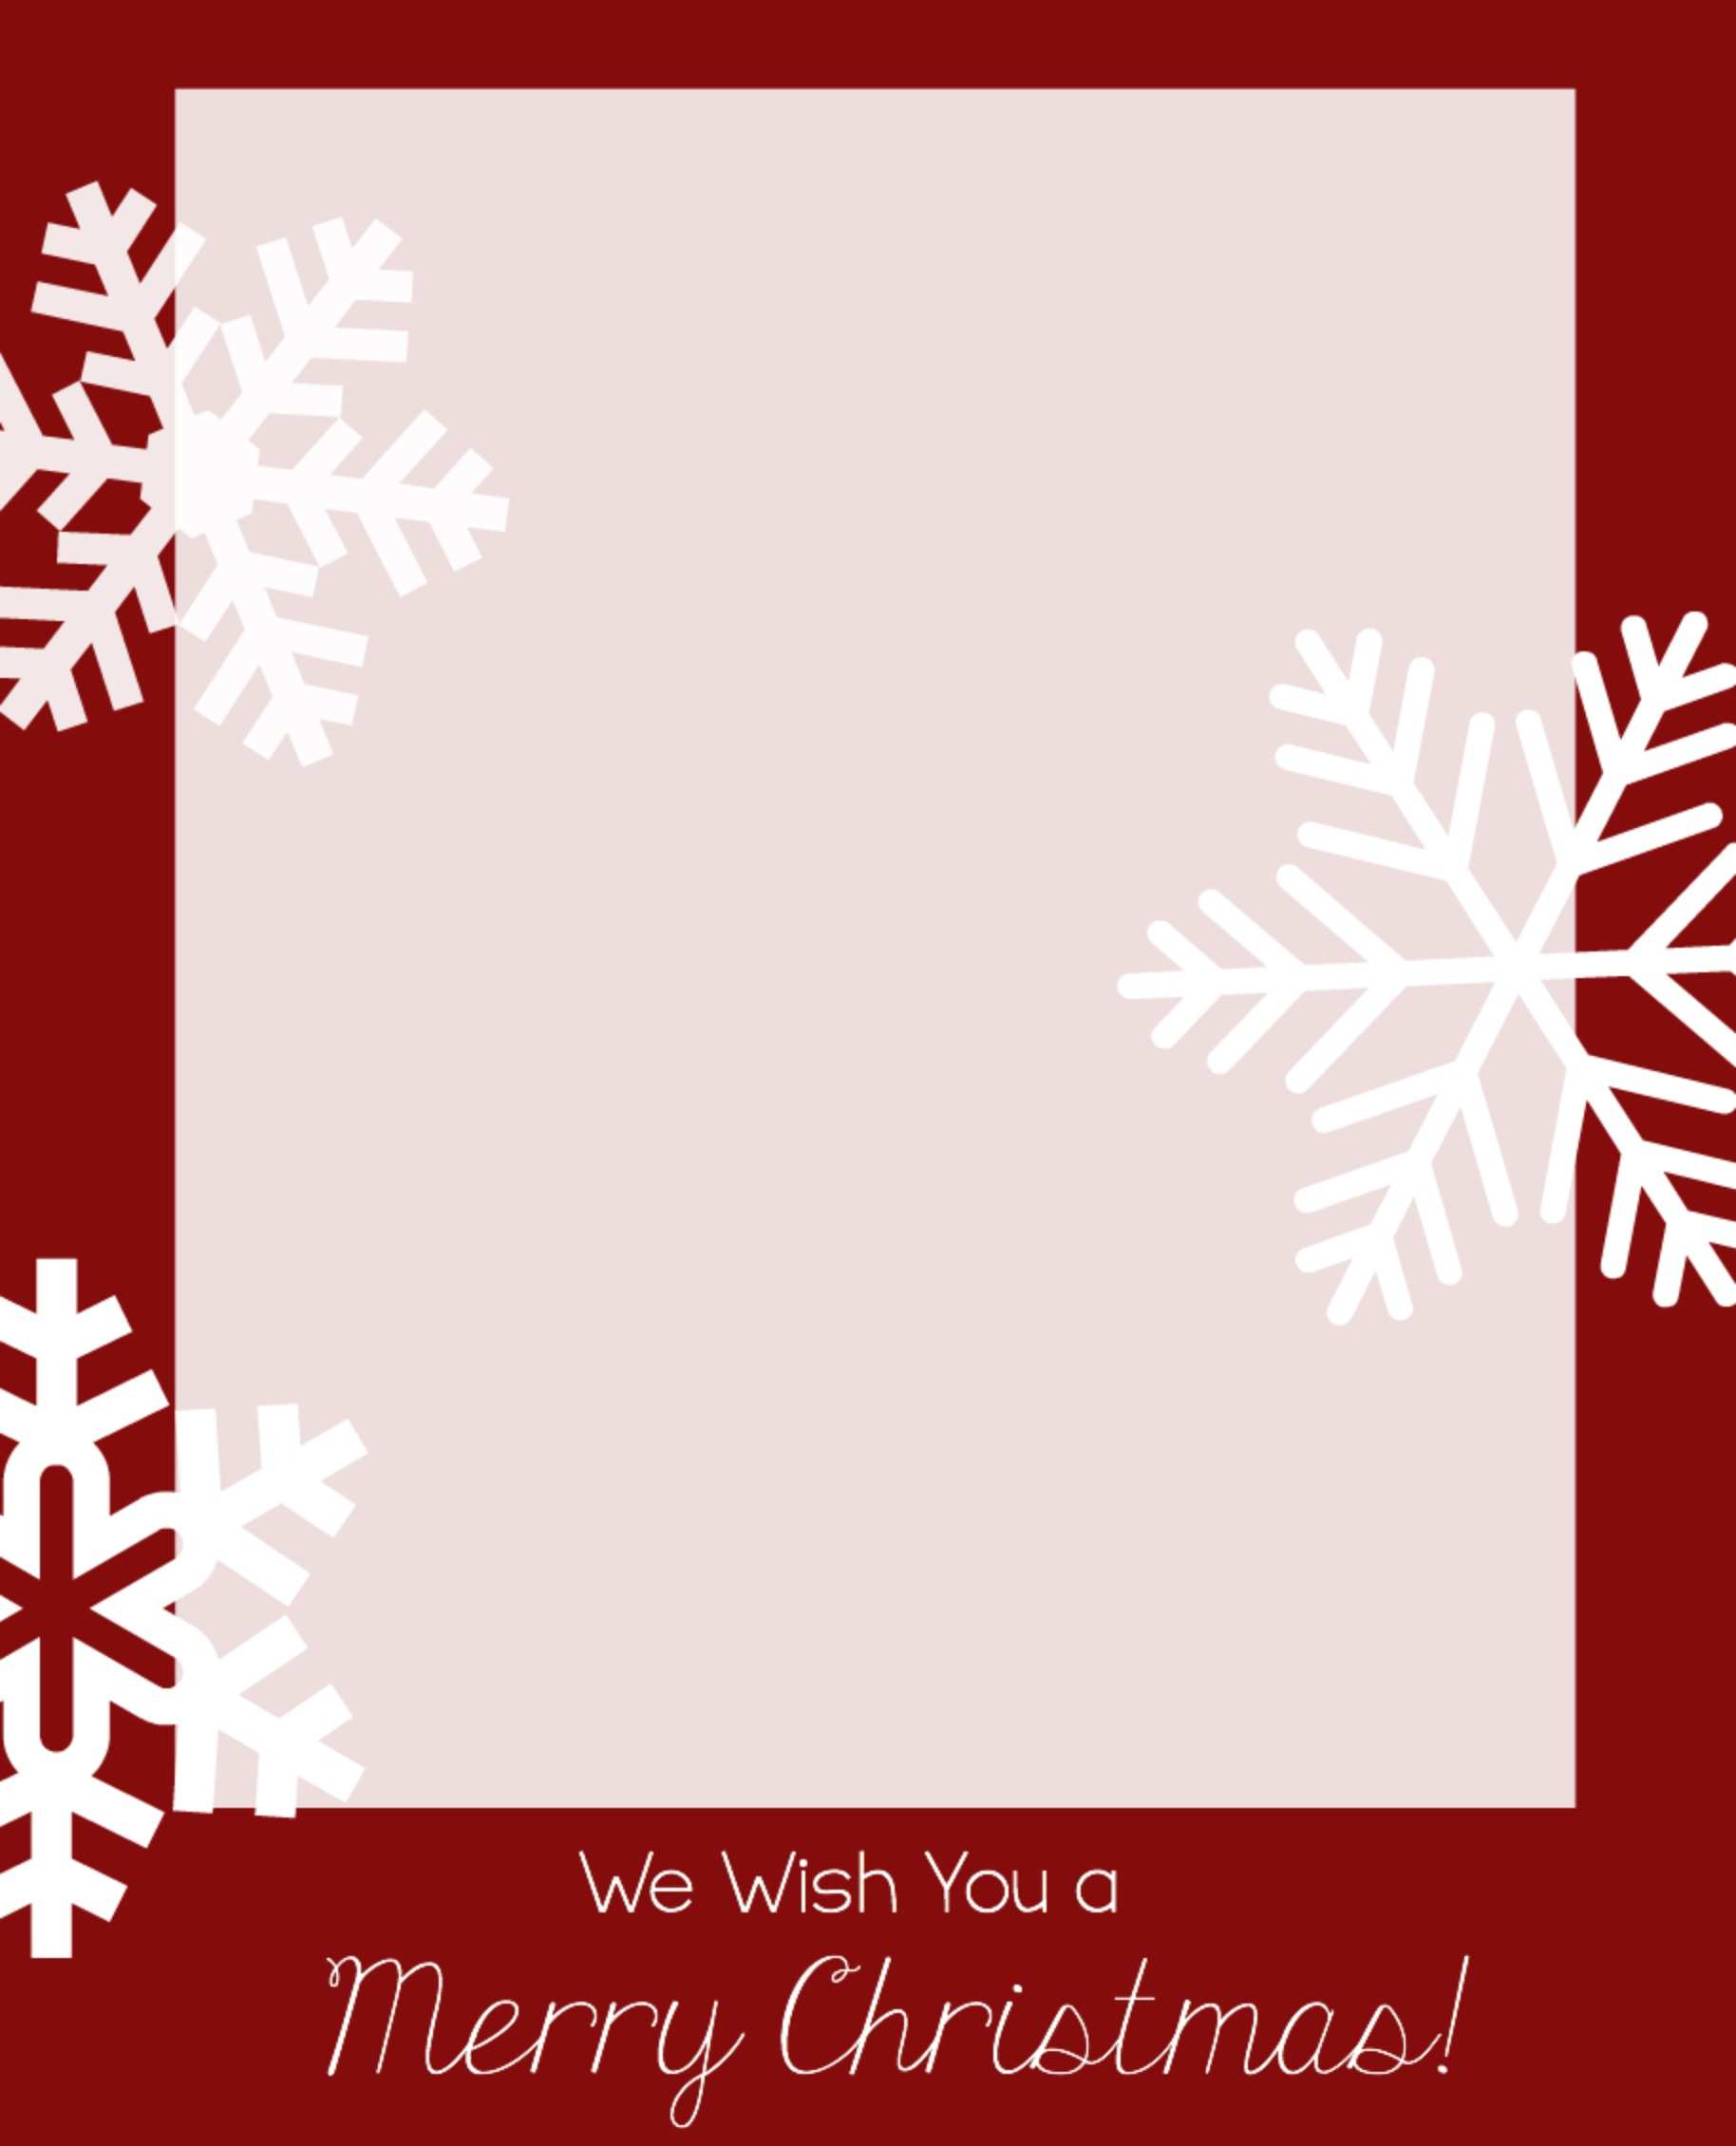 18 Creating Free Christmas Card Template For Photos Now by Free Christmas Card Template For Photos